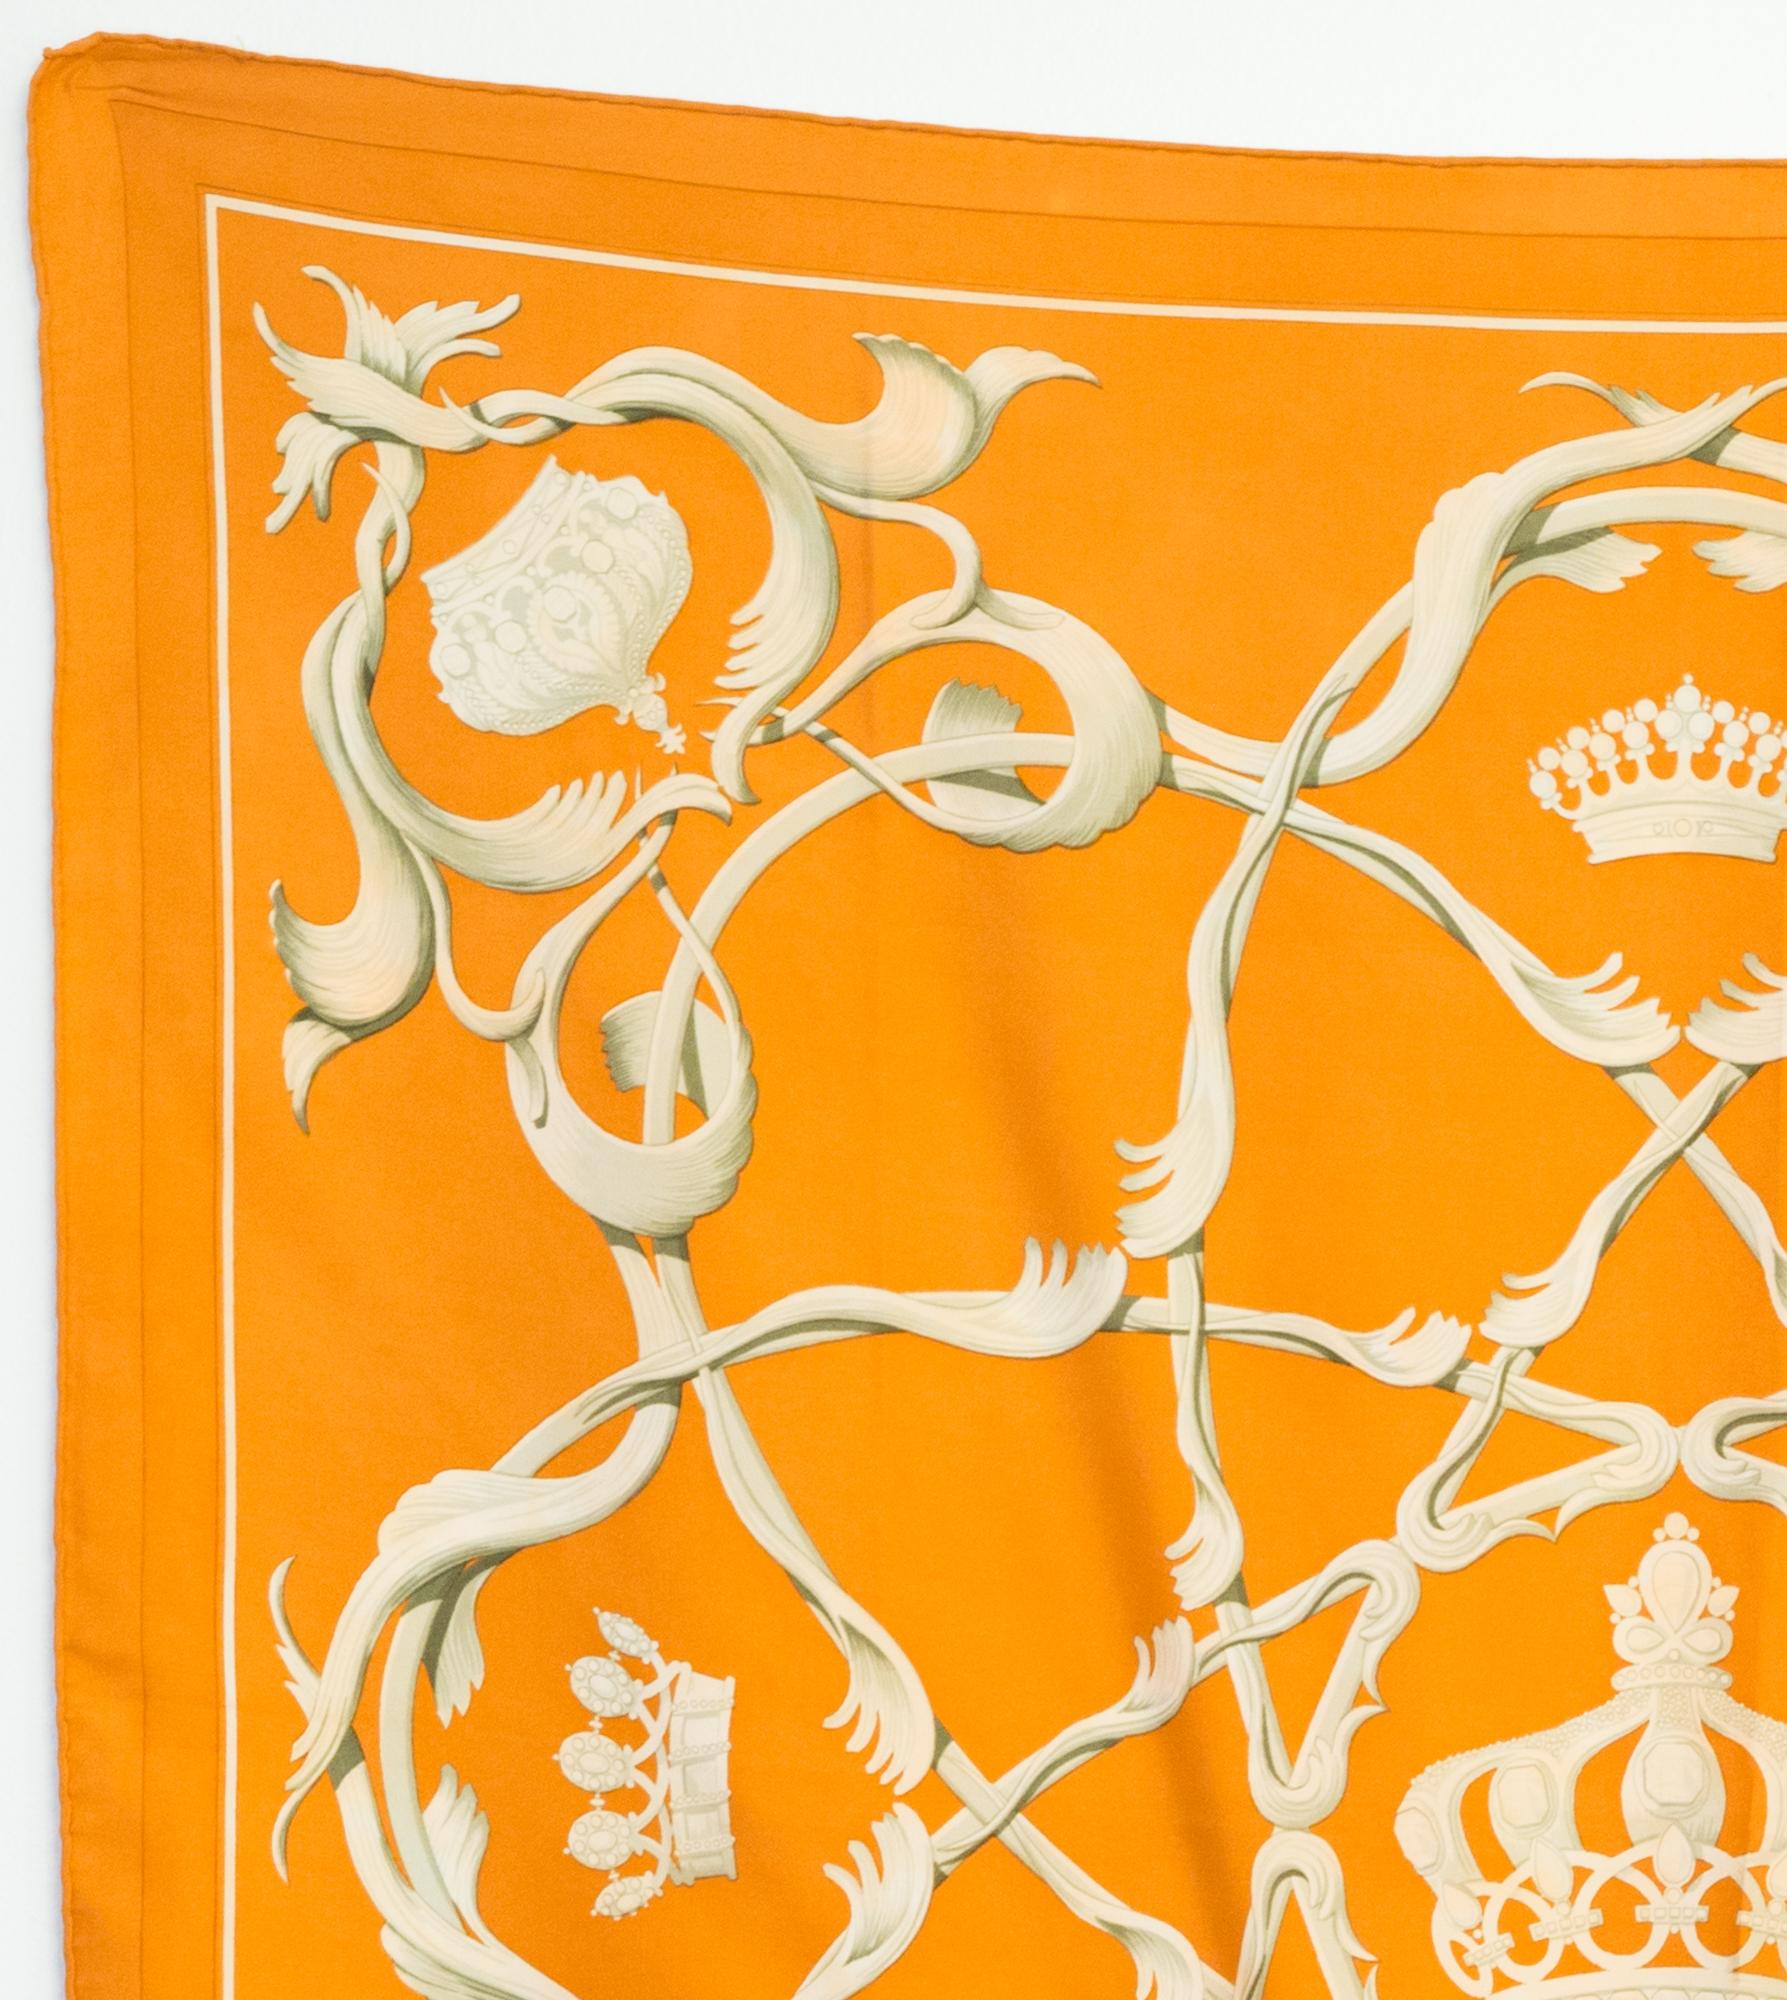 Hermes silk scarf Crowns by by Julia Abadie featuring an orange ground with crowns on and a Hermès signature. 
First issue 1969
In good vintage condition. Made in France.
35,4in. (90cm)  X 35,4in. (90cm)
We guarantee you will receive this  iconic